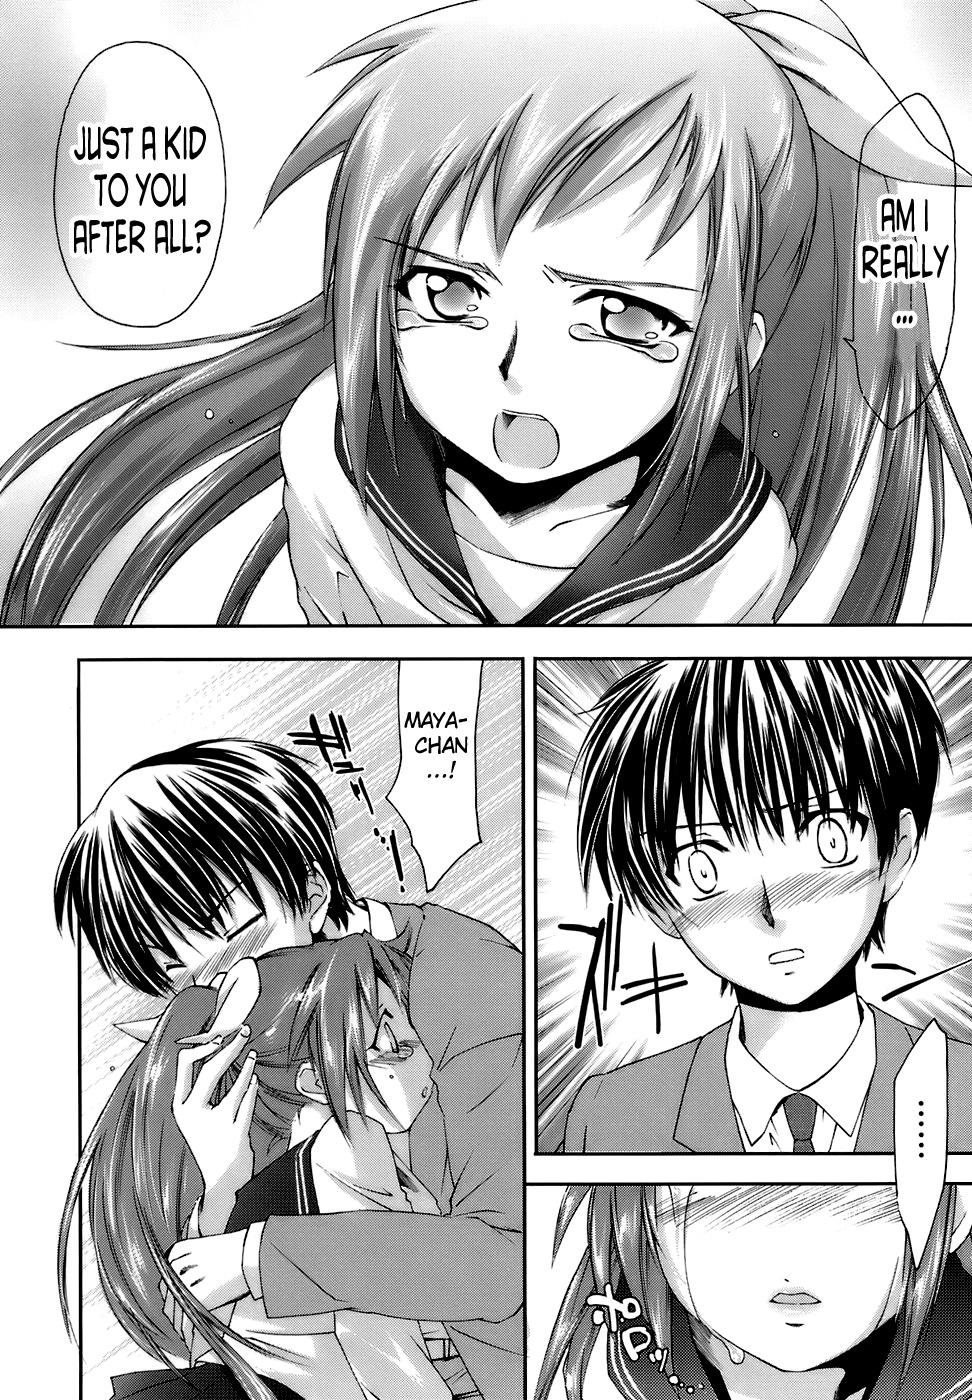 Grande Fresh Lovers Chapter 7 - Age of Dishonesty Spooning - Page 10